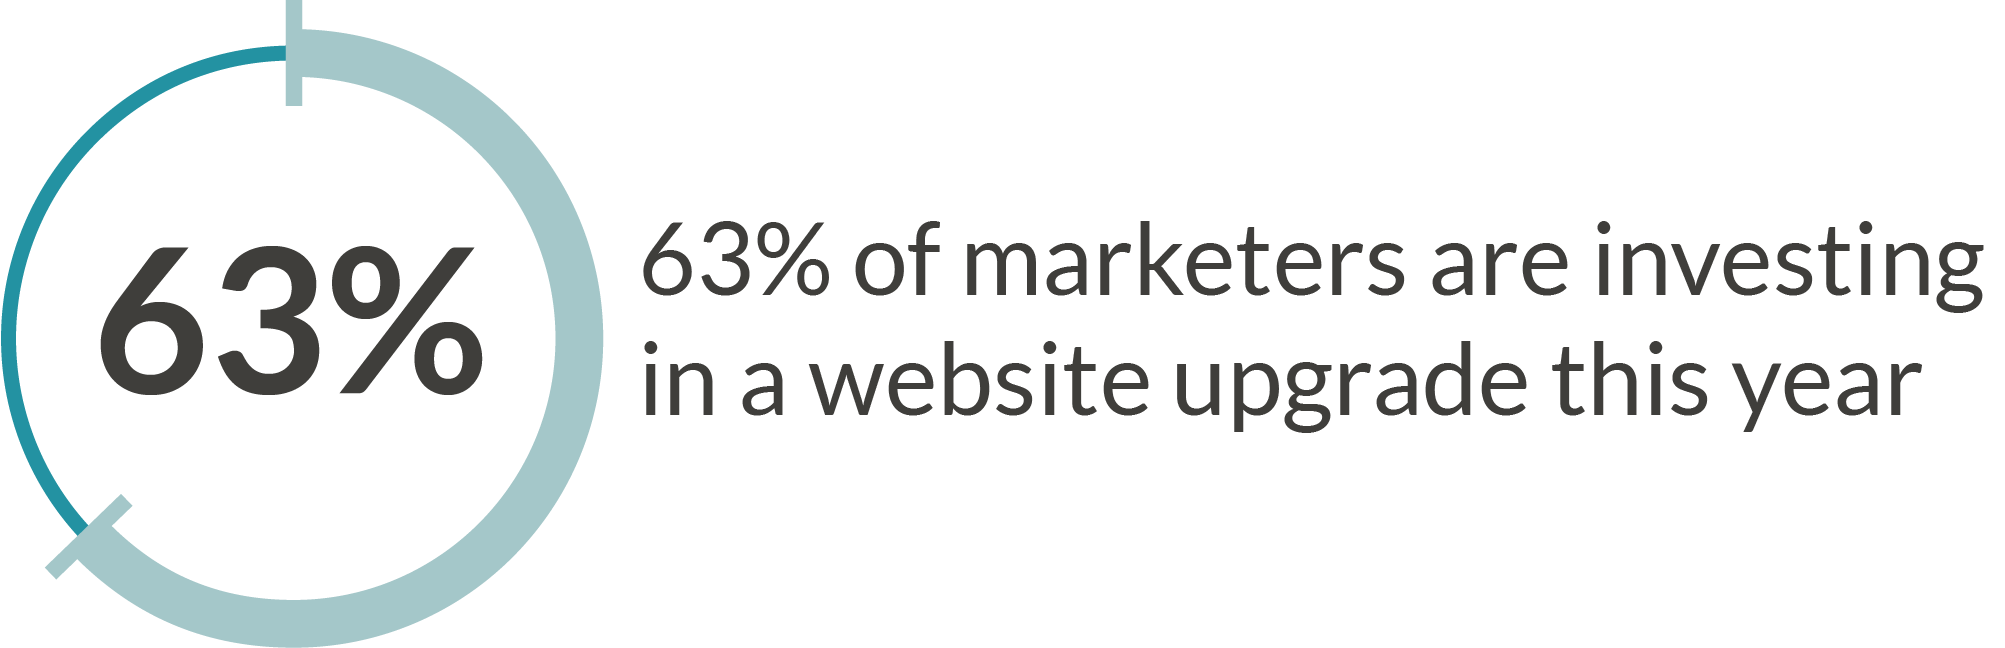 63% of marketers are investing in their website